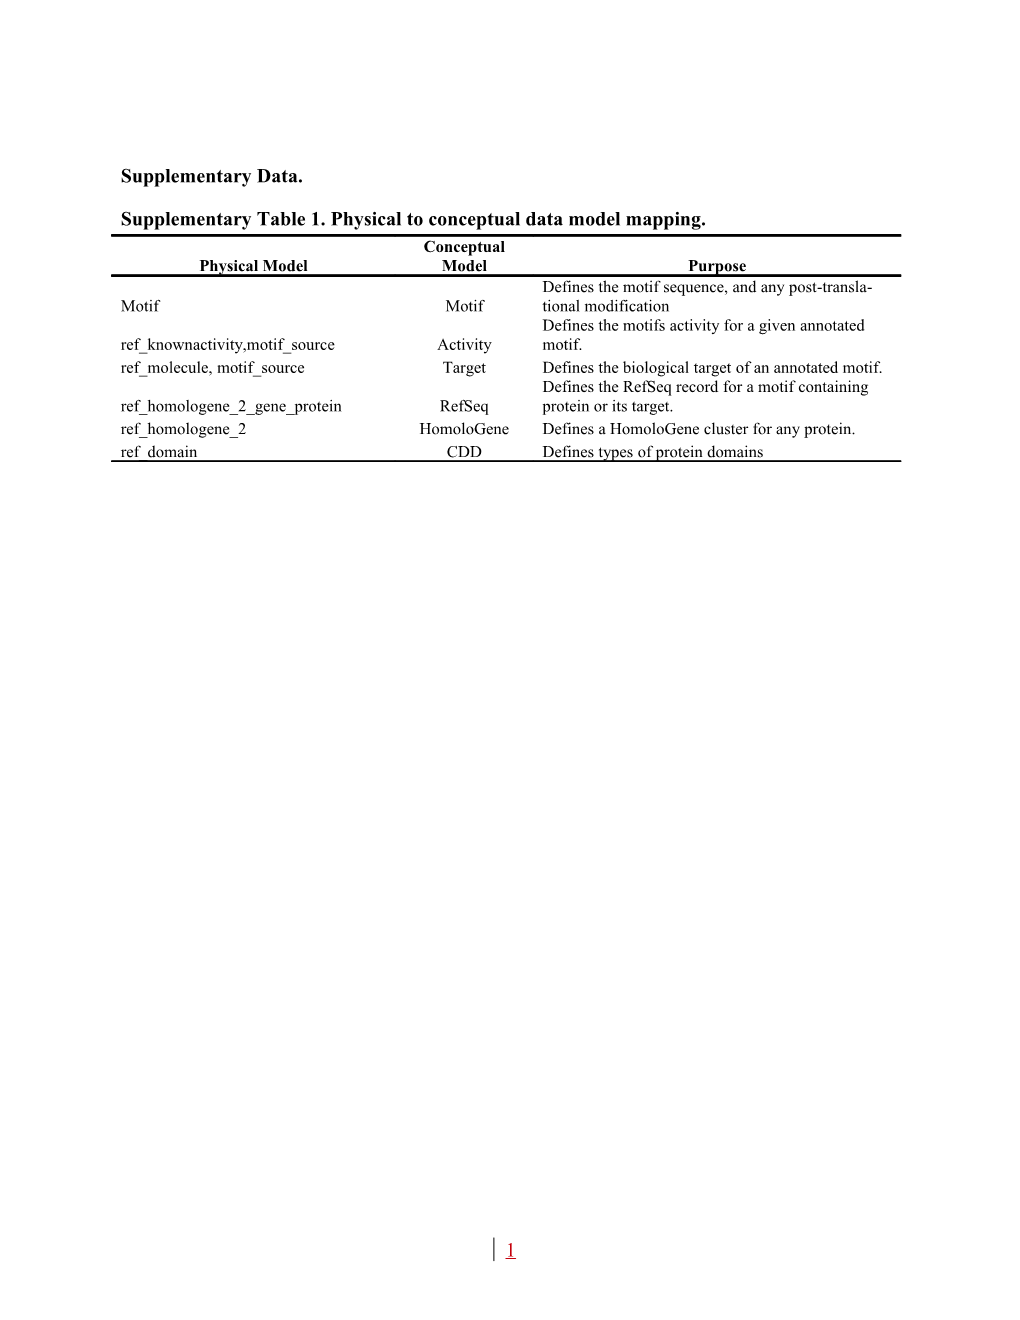 Supplementarytable 1. Physical to Conceptual Data Model Mapping